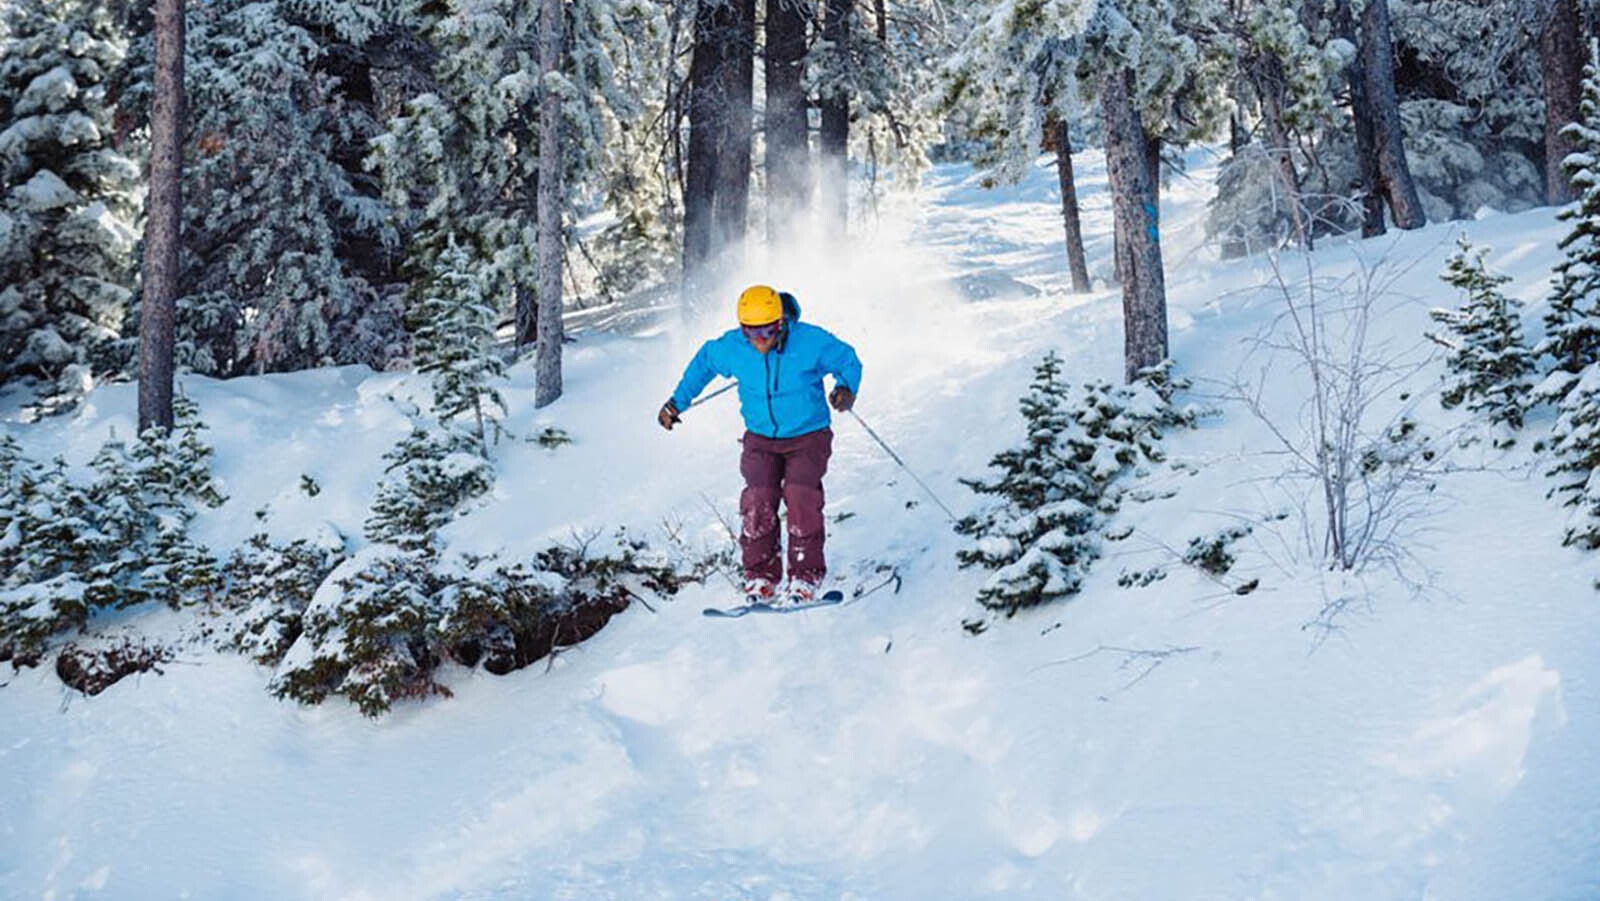 It may not have the cachet of some of the state's larger ski areas, but Hogadon Basin on Casper Mountain is gaining a larger following as more people consider Casper a vacation destination.